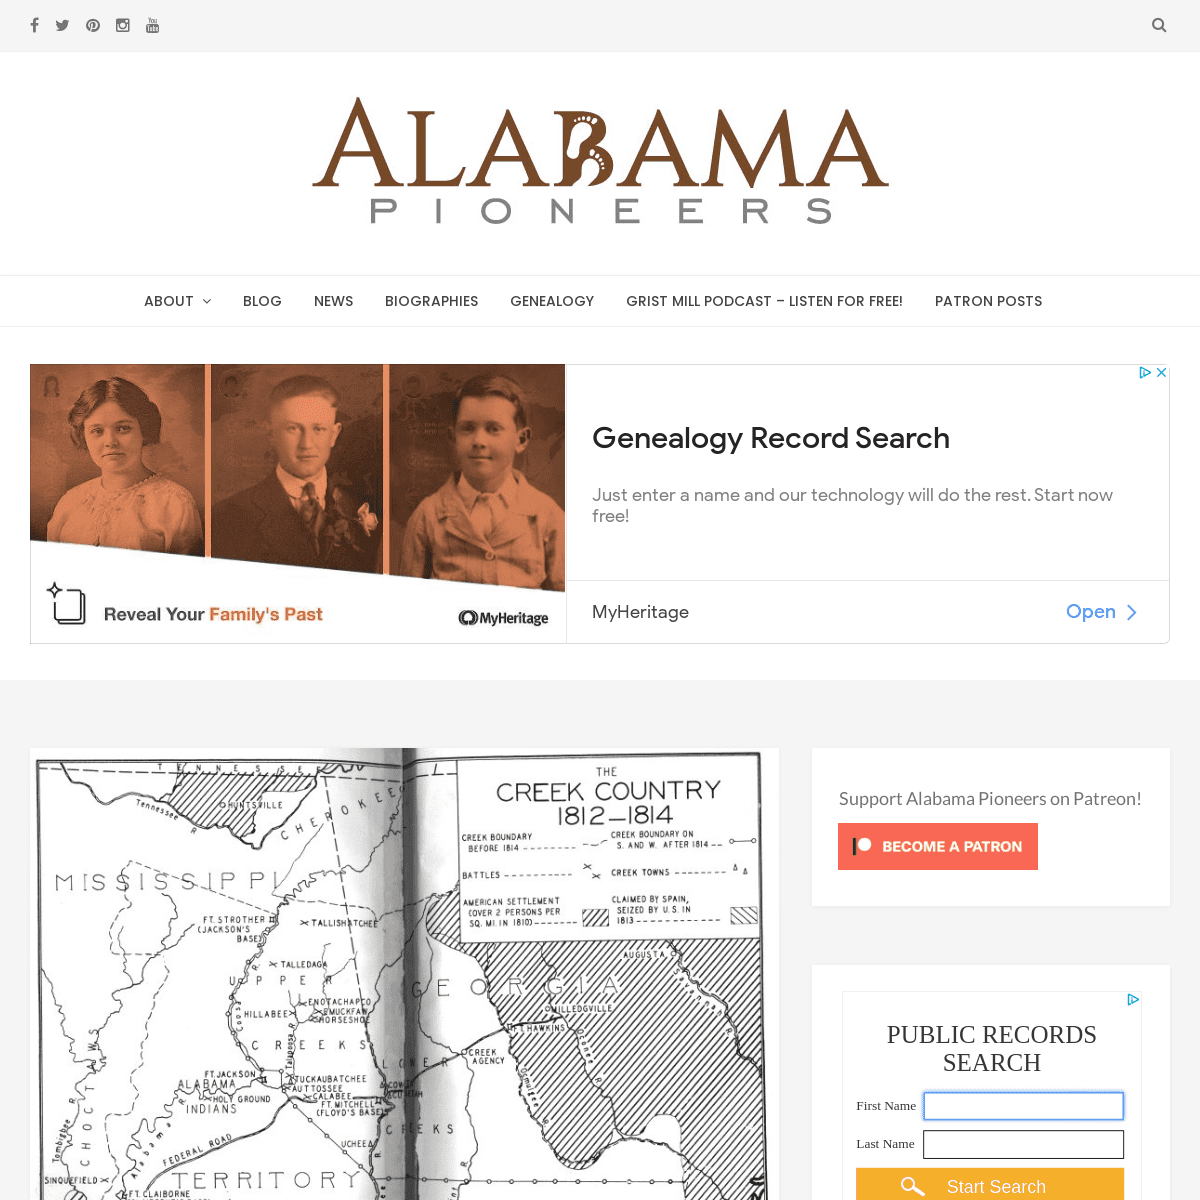 A complete backup of https://alabamapioneers.com